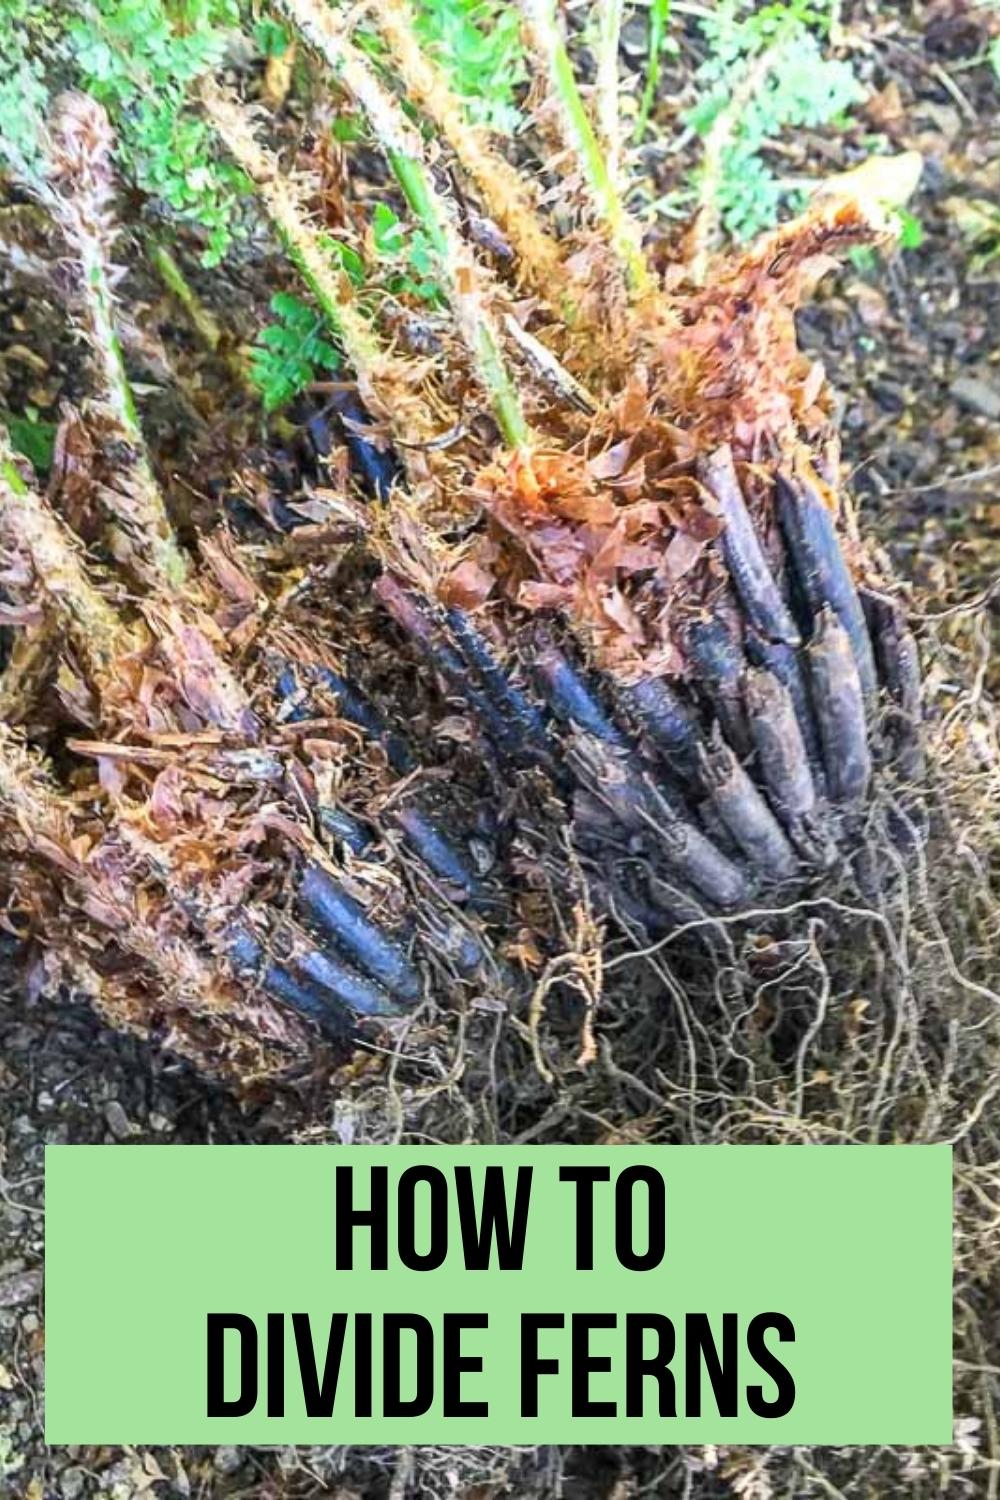 How to divide ferns with image of root clumps